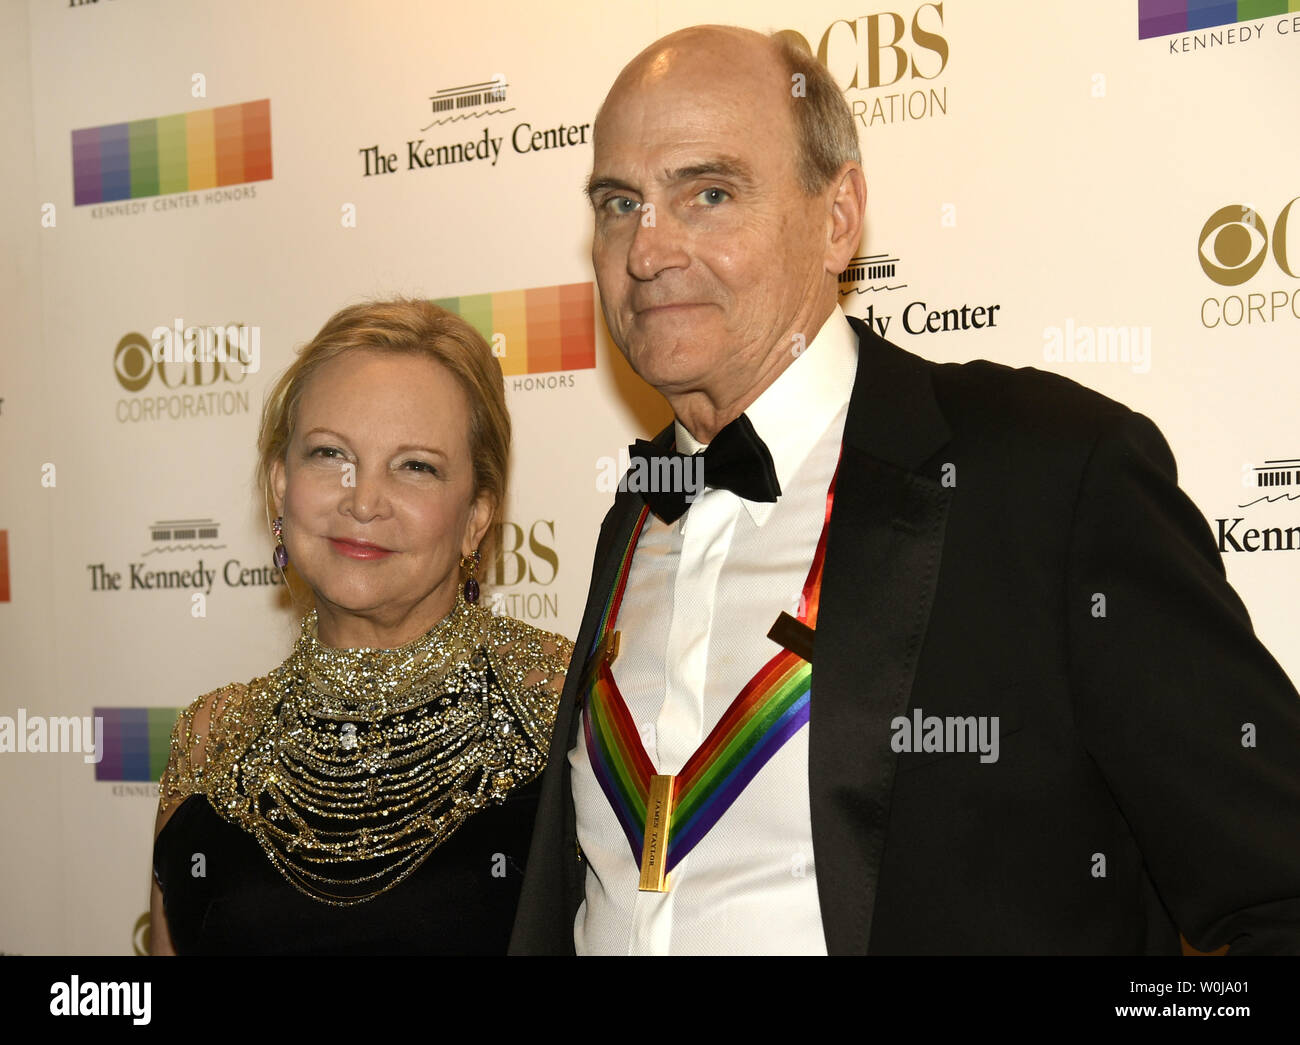 2016 Kennedy Center Honoree singer-songwriter James Taylor and his wife Caroline 'Kim' Smedvig greet photographers as they arrive on the red carpet for an evening of gala entertainment at the Kennedy Center, December 4, 2016, in Washington, DC.  The Honors are bestowed annually on five artists for their lifetime achievement in the arts and culture.    Photo by Mike Theiler/UPI Stock Photo